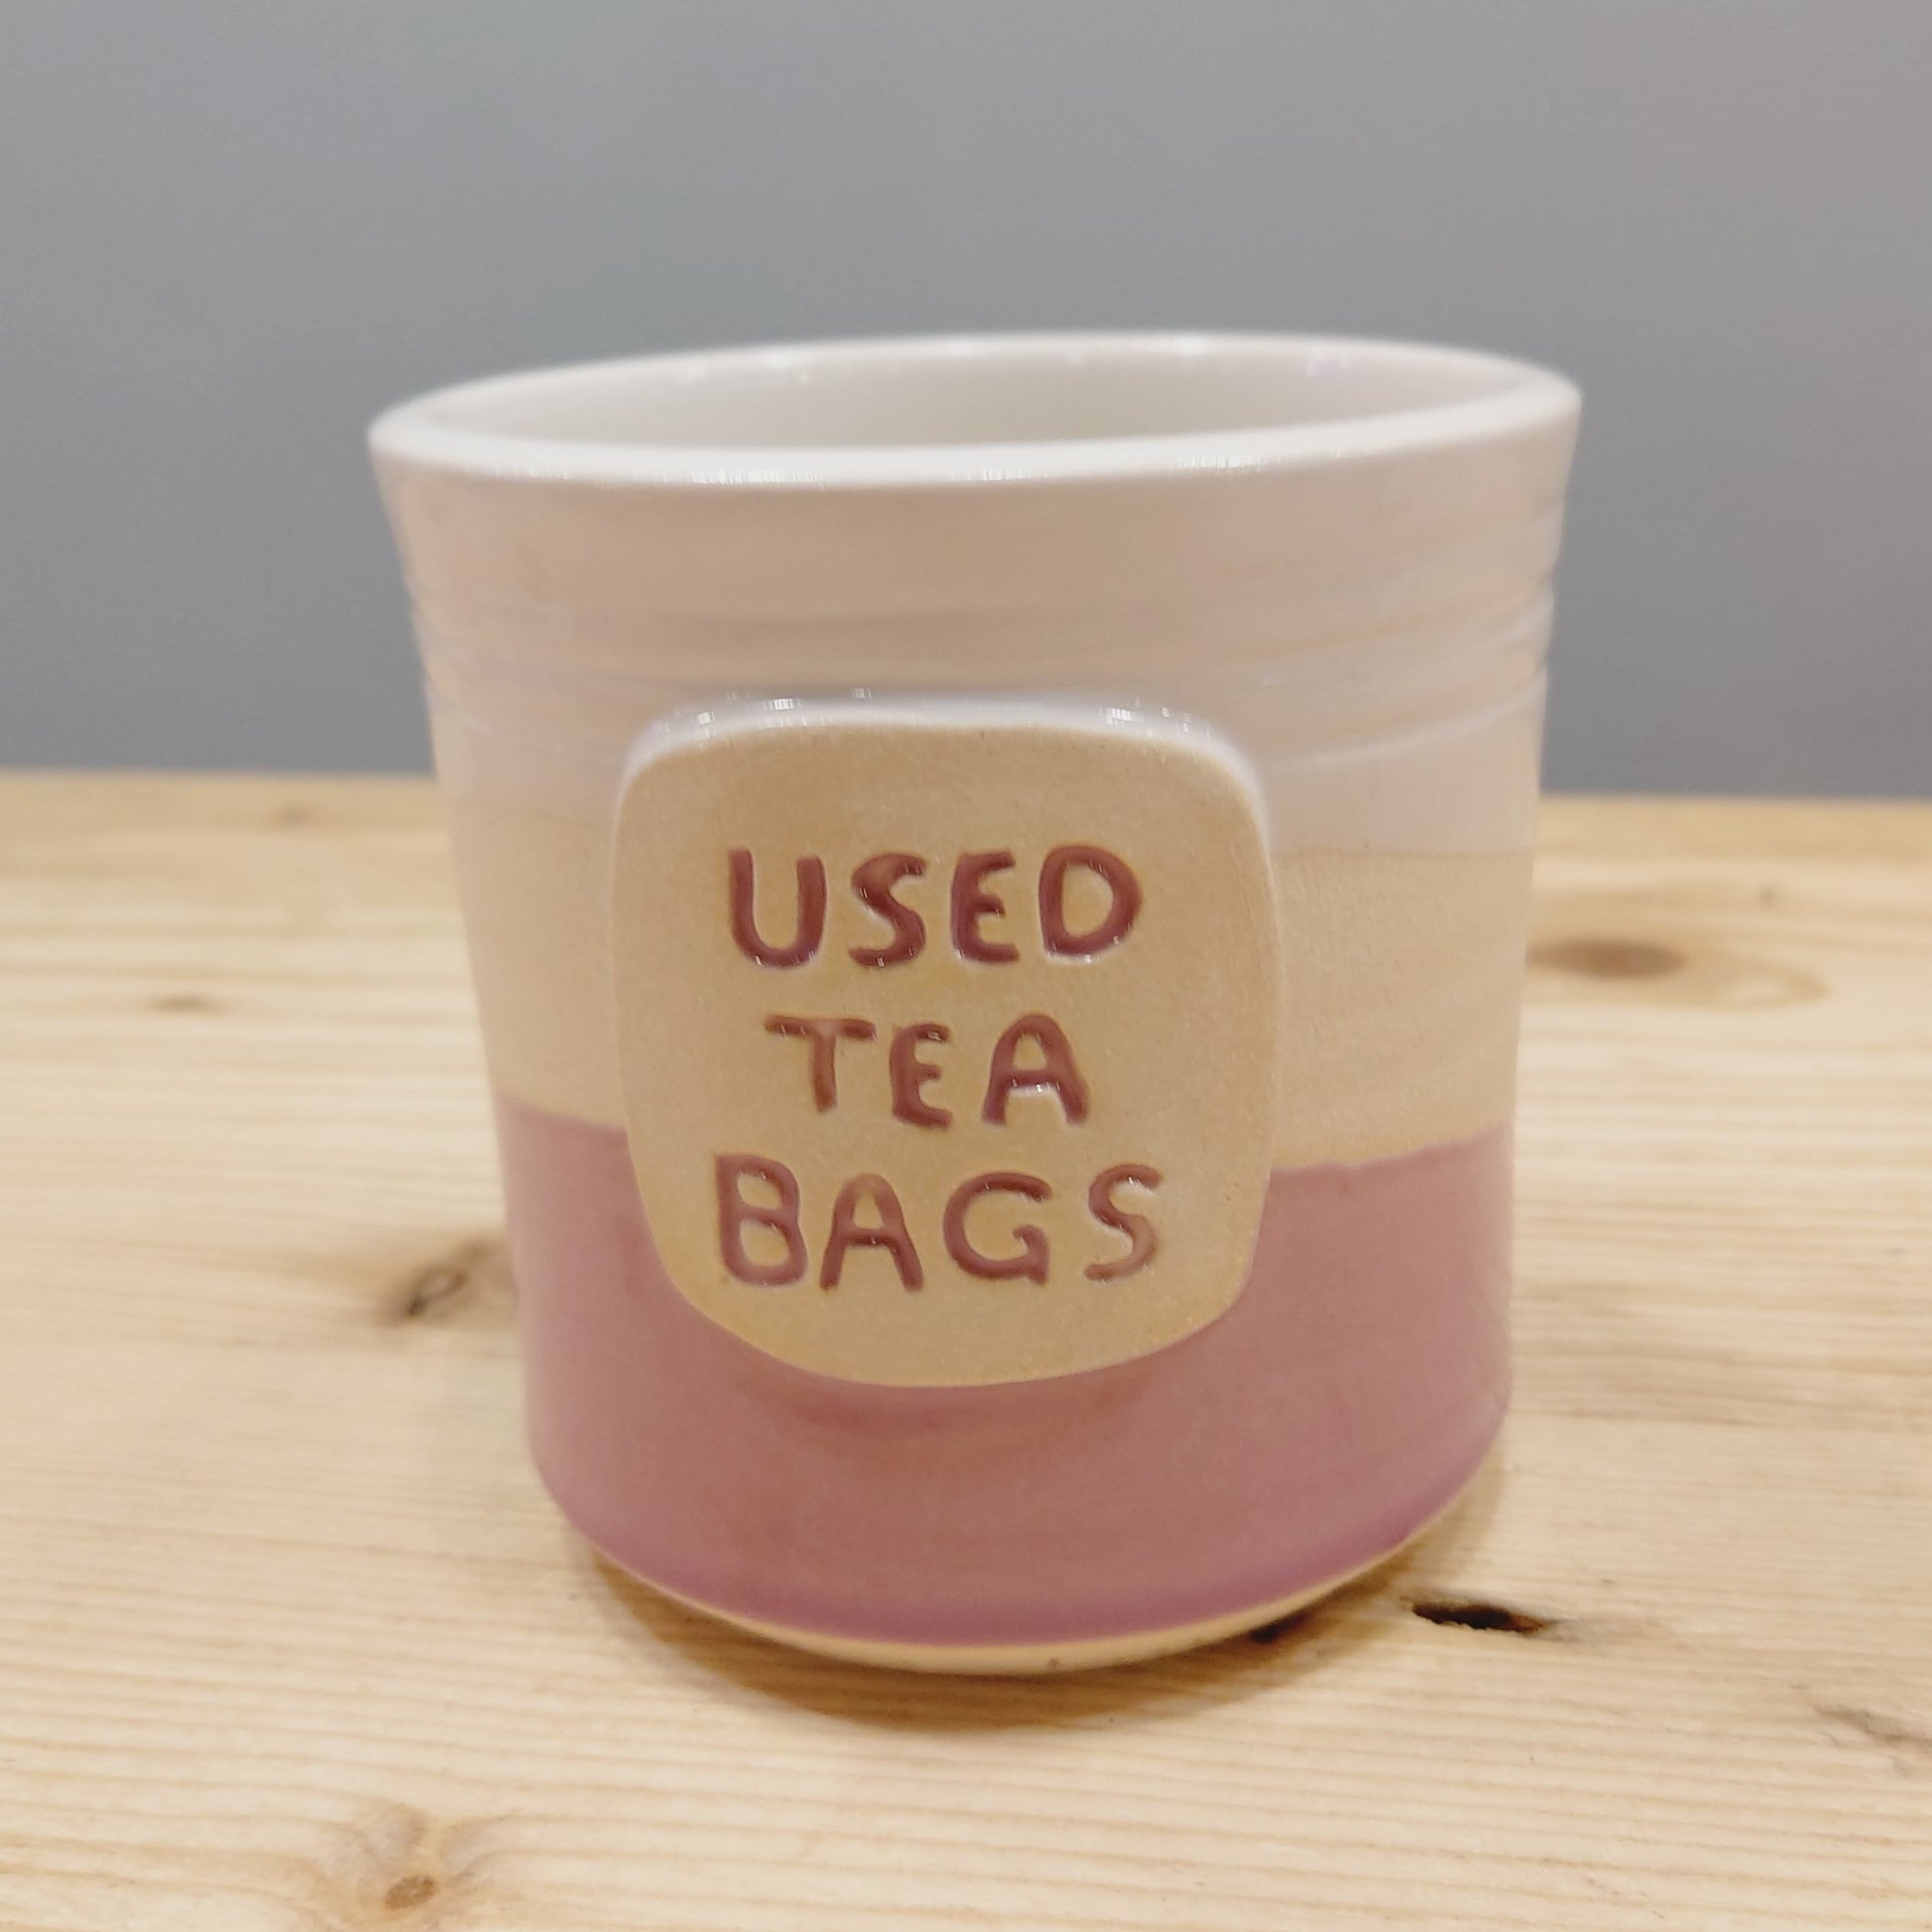 Woodford Pottery "Used Tea Bags" Container-Breda's Gift Shop